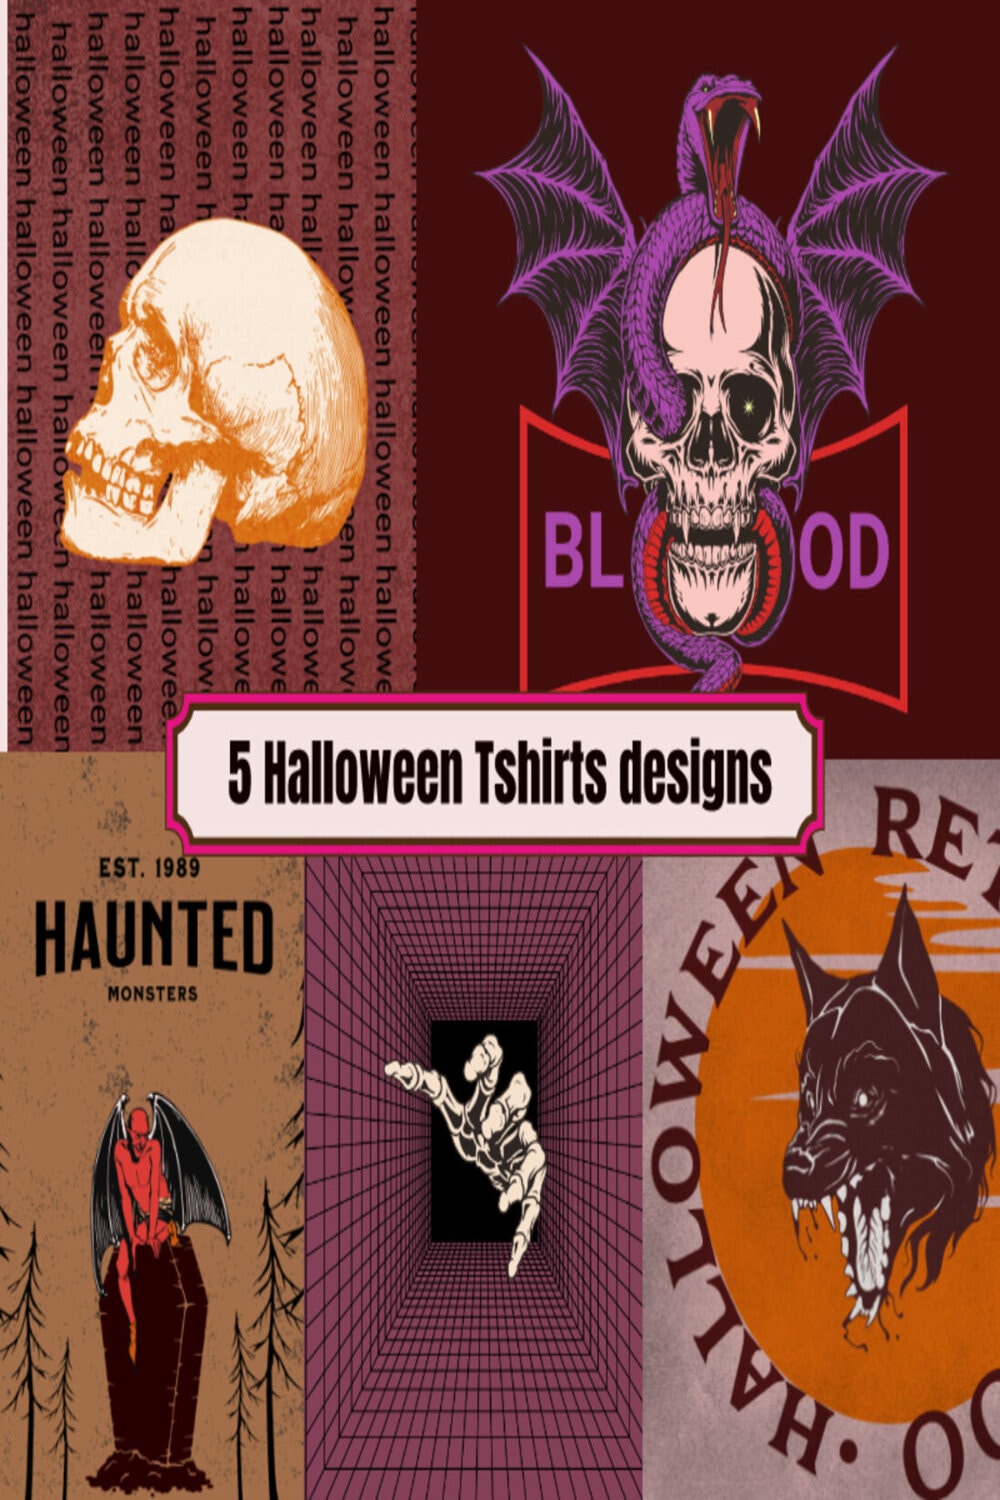 A selection of creepy images for print on T-shirts on the theme of Halloween.